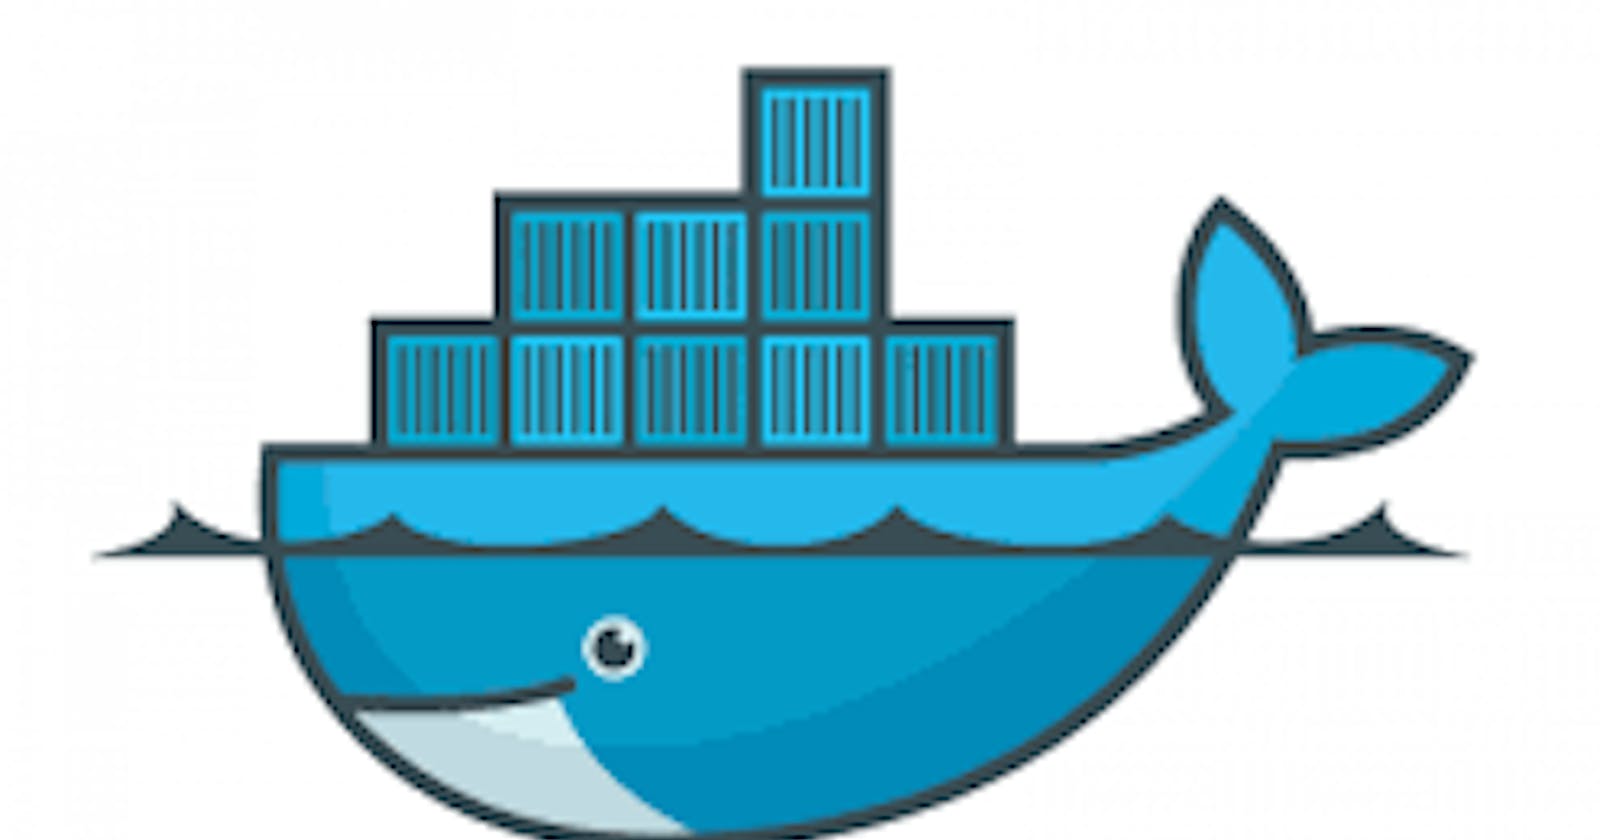 Getting Started with Portainer - Tool to manage your Docker containers